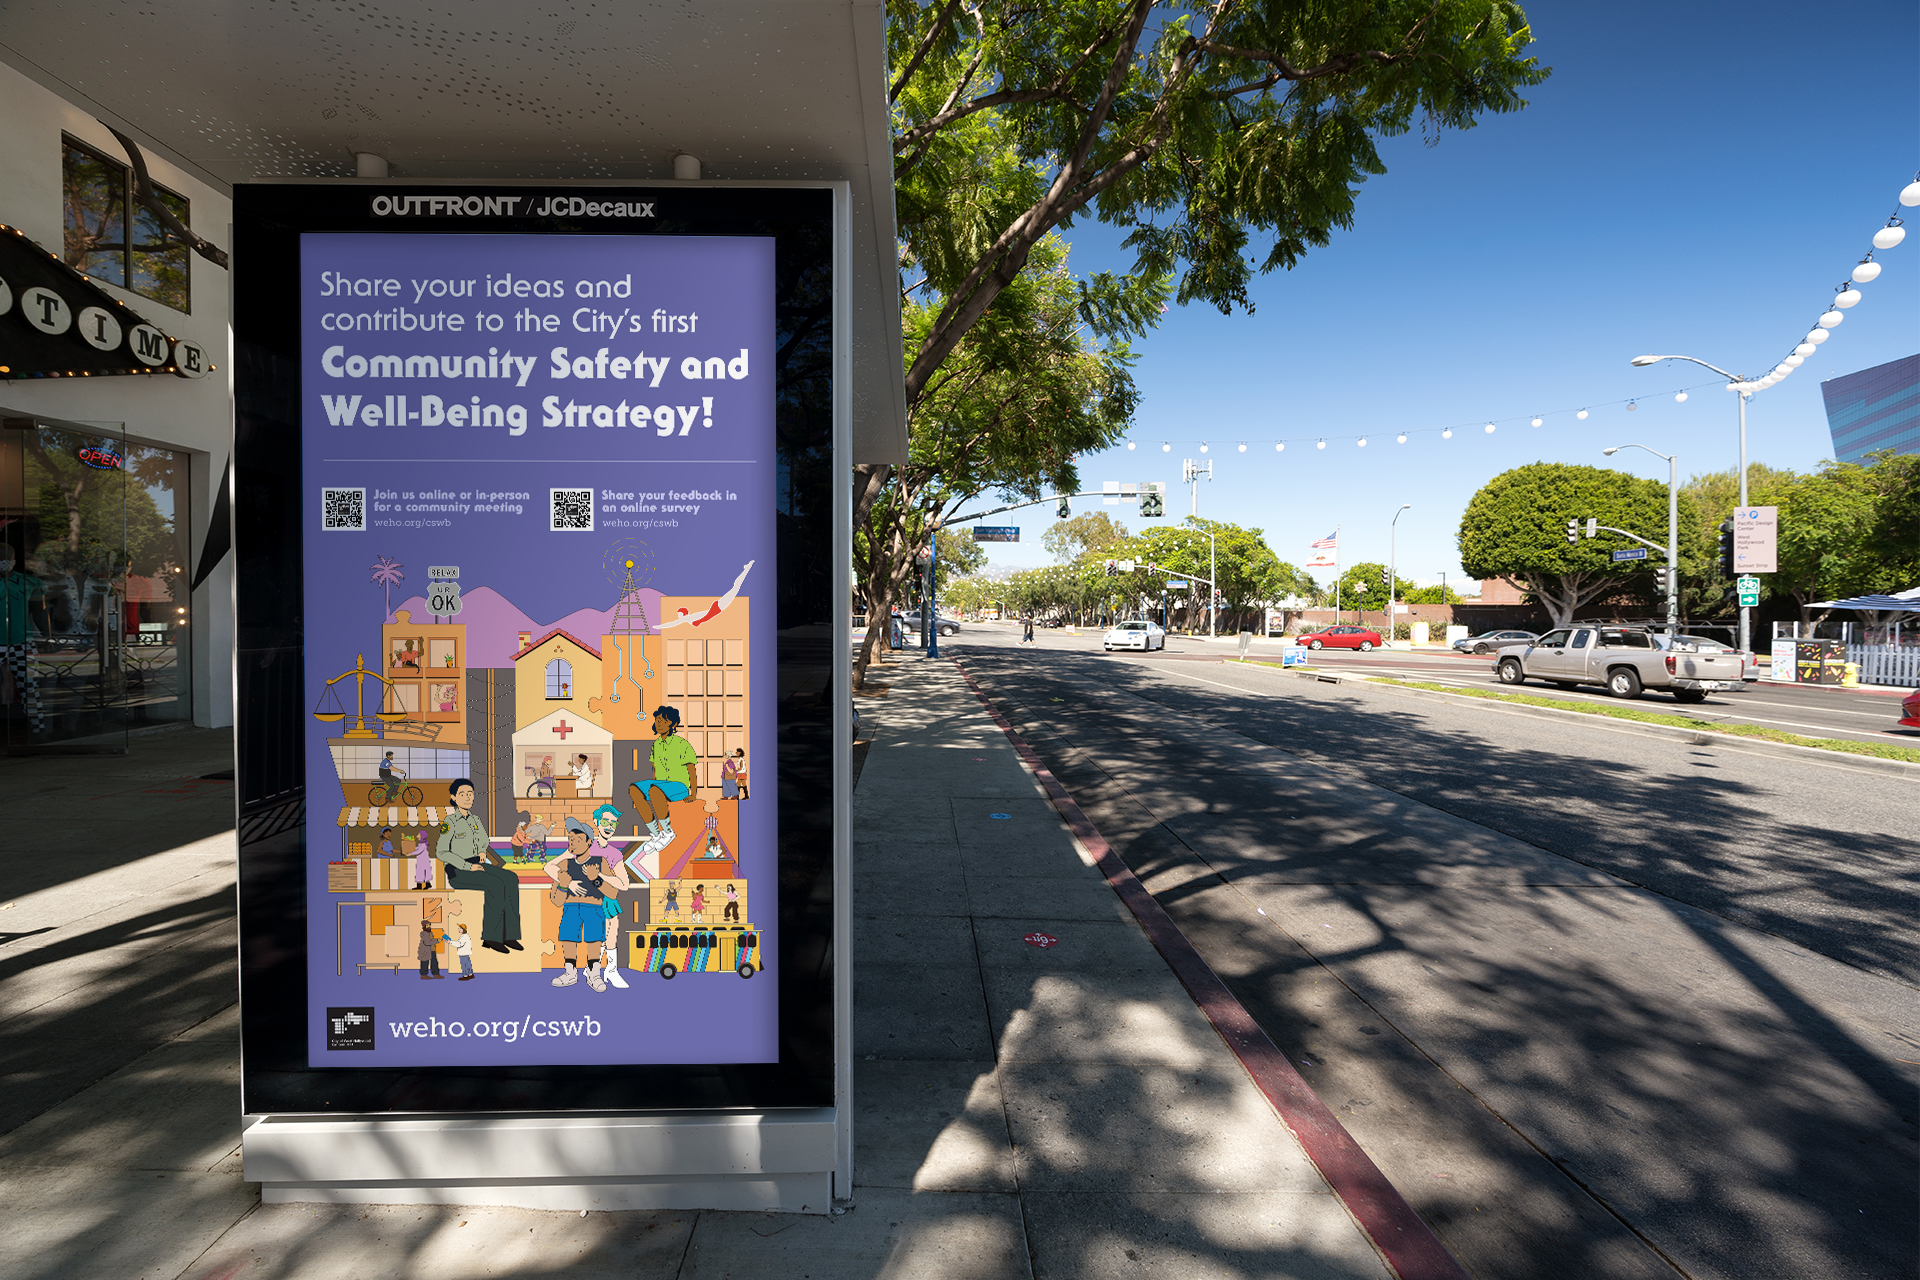 Digital Transit Ad from City of West Hollywood (WeHo) Community Safety & Well Being campaign designed by Kilter.